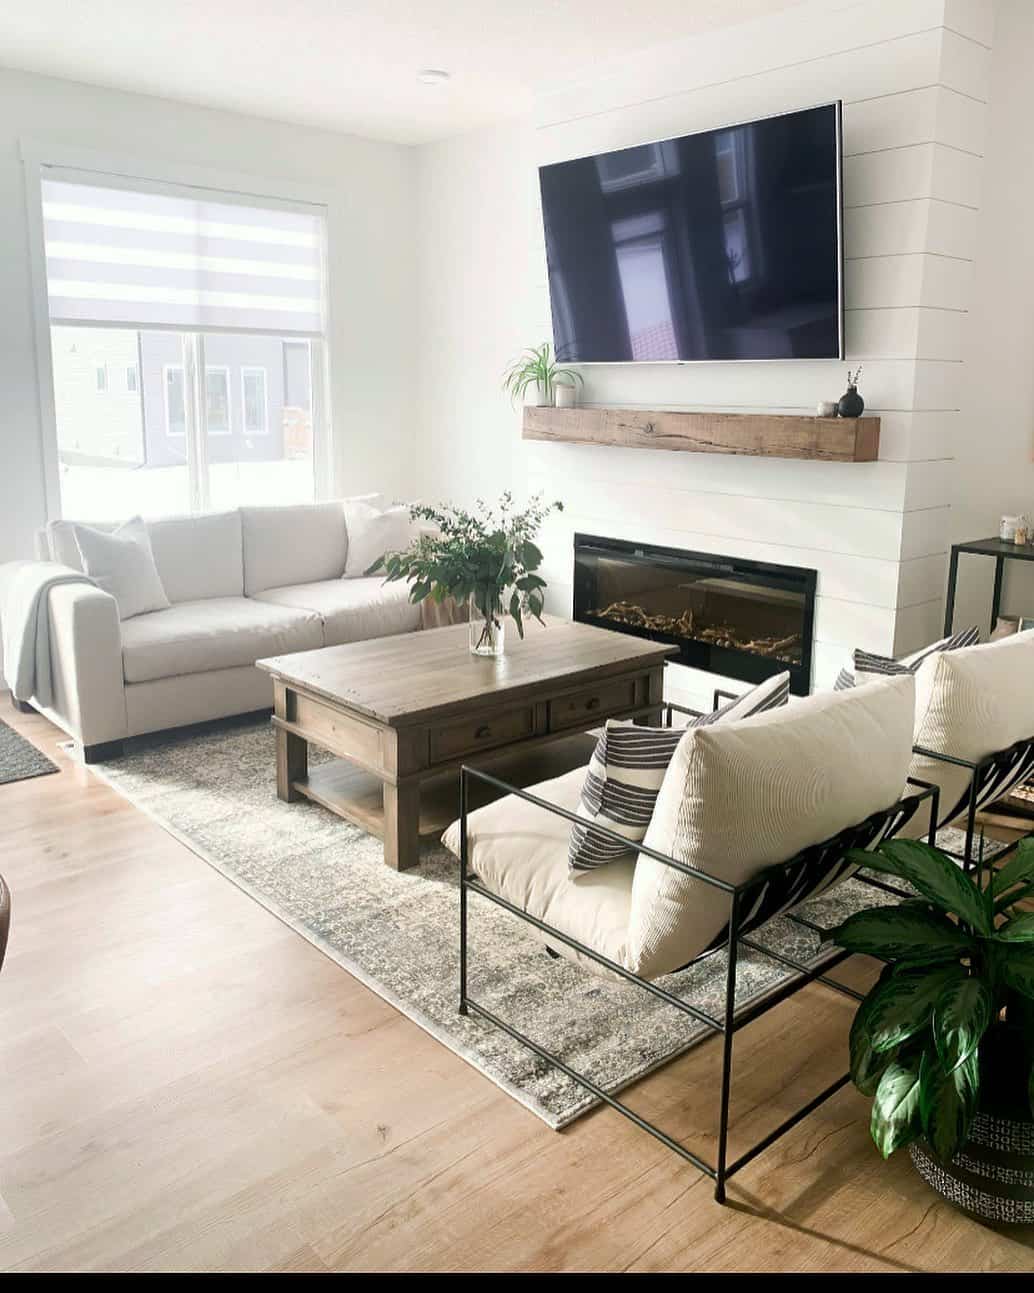 Inviting and Cozy Living Area